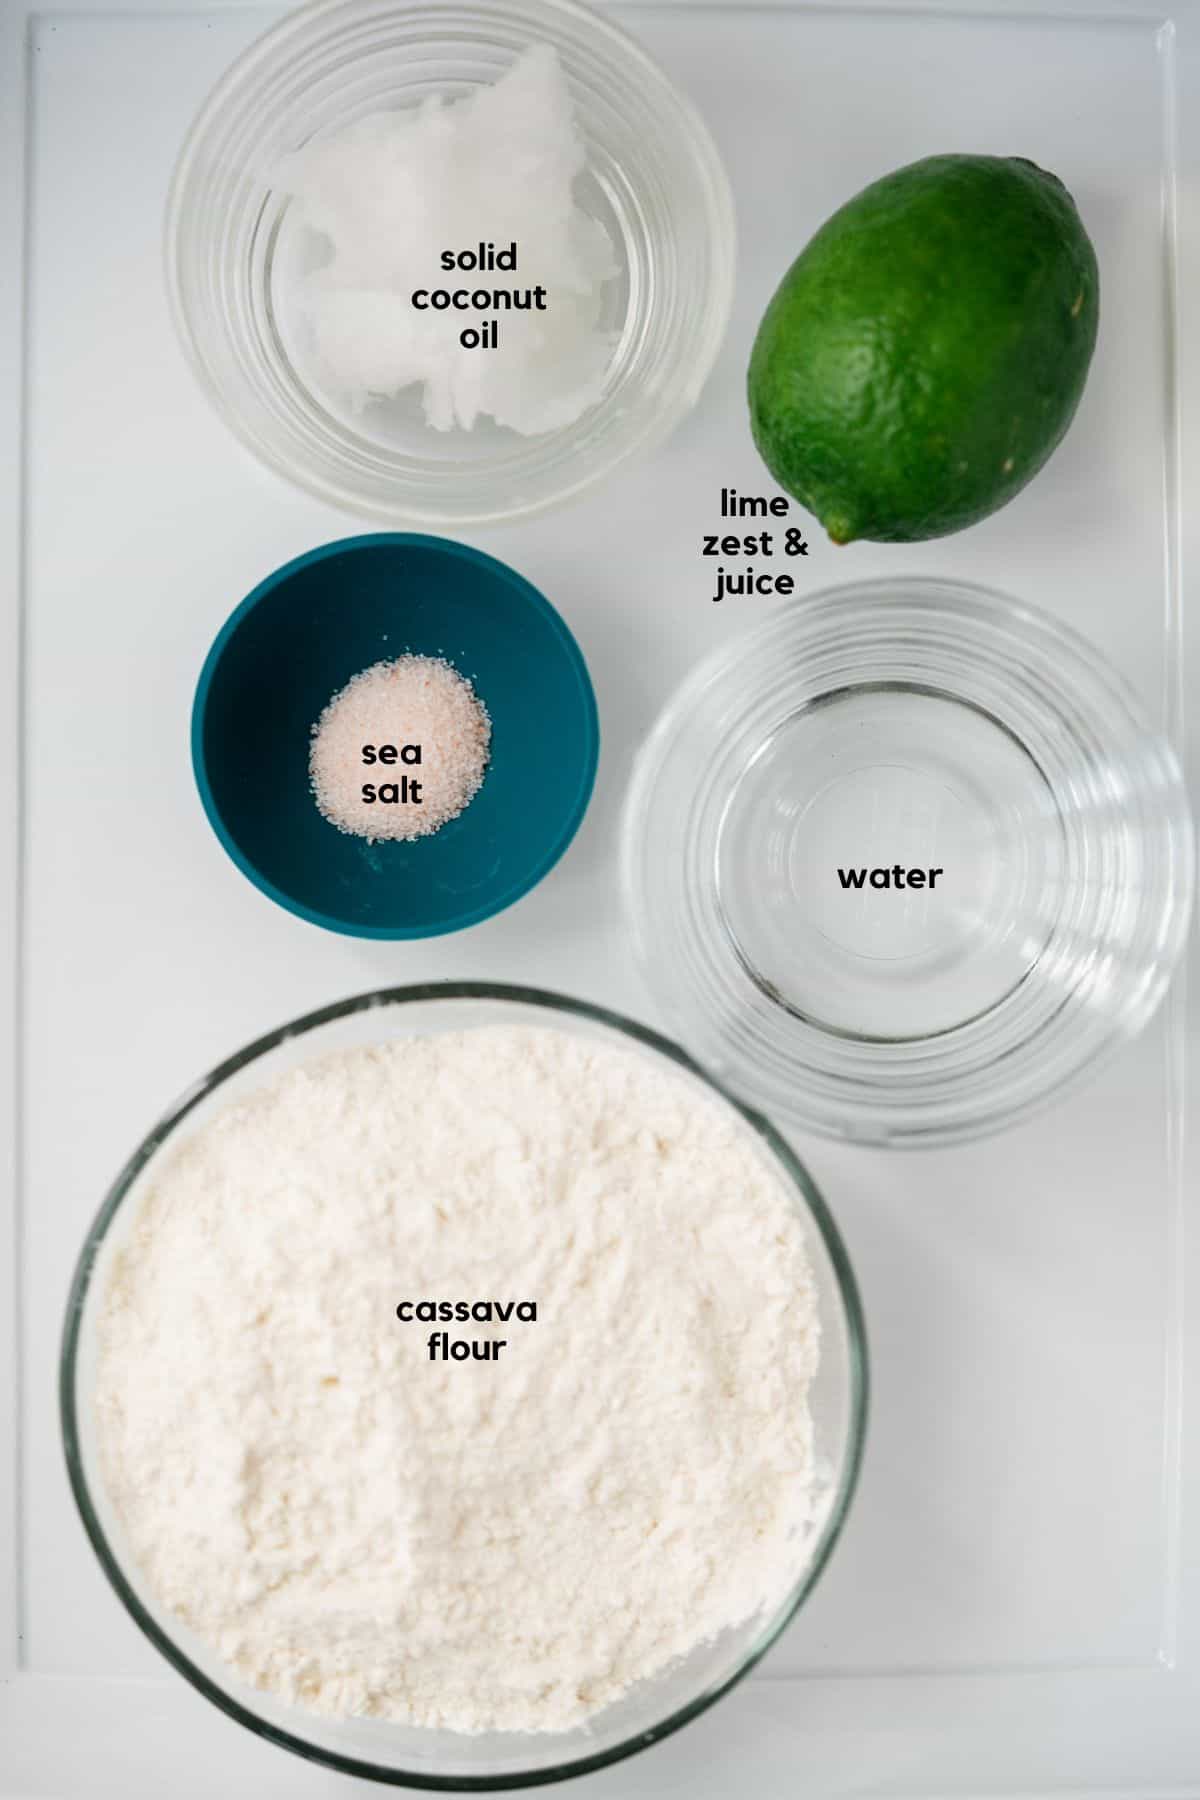 labelled ingredients photo.